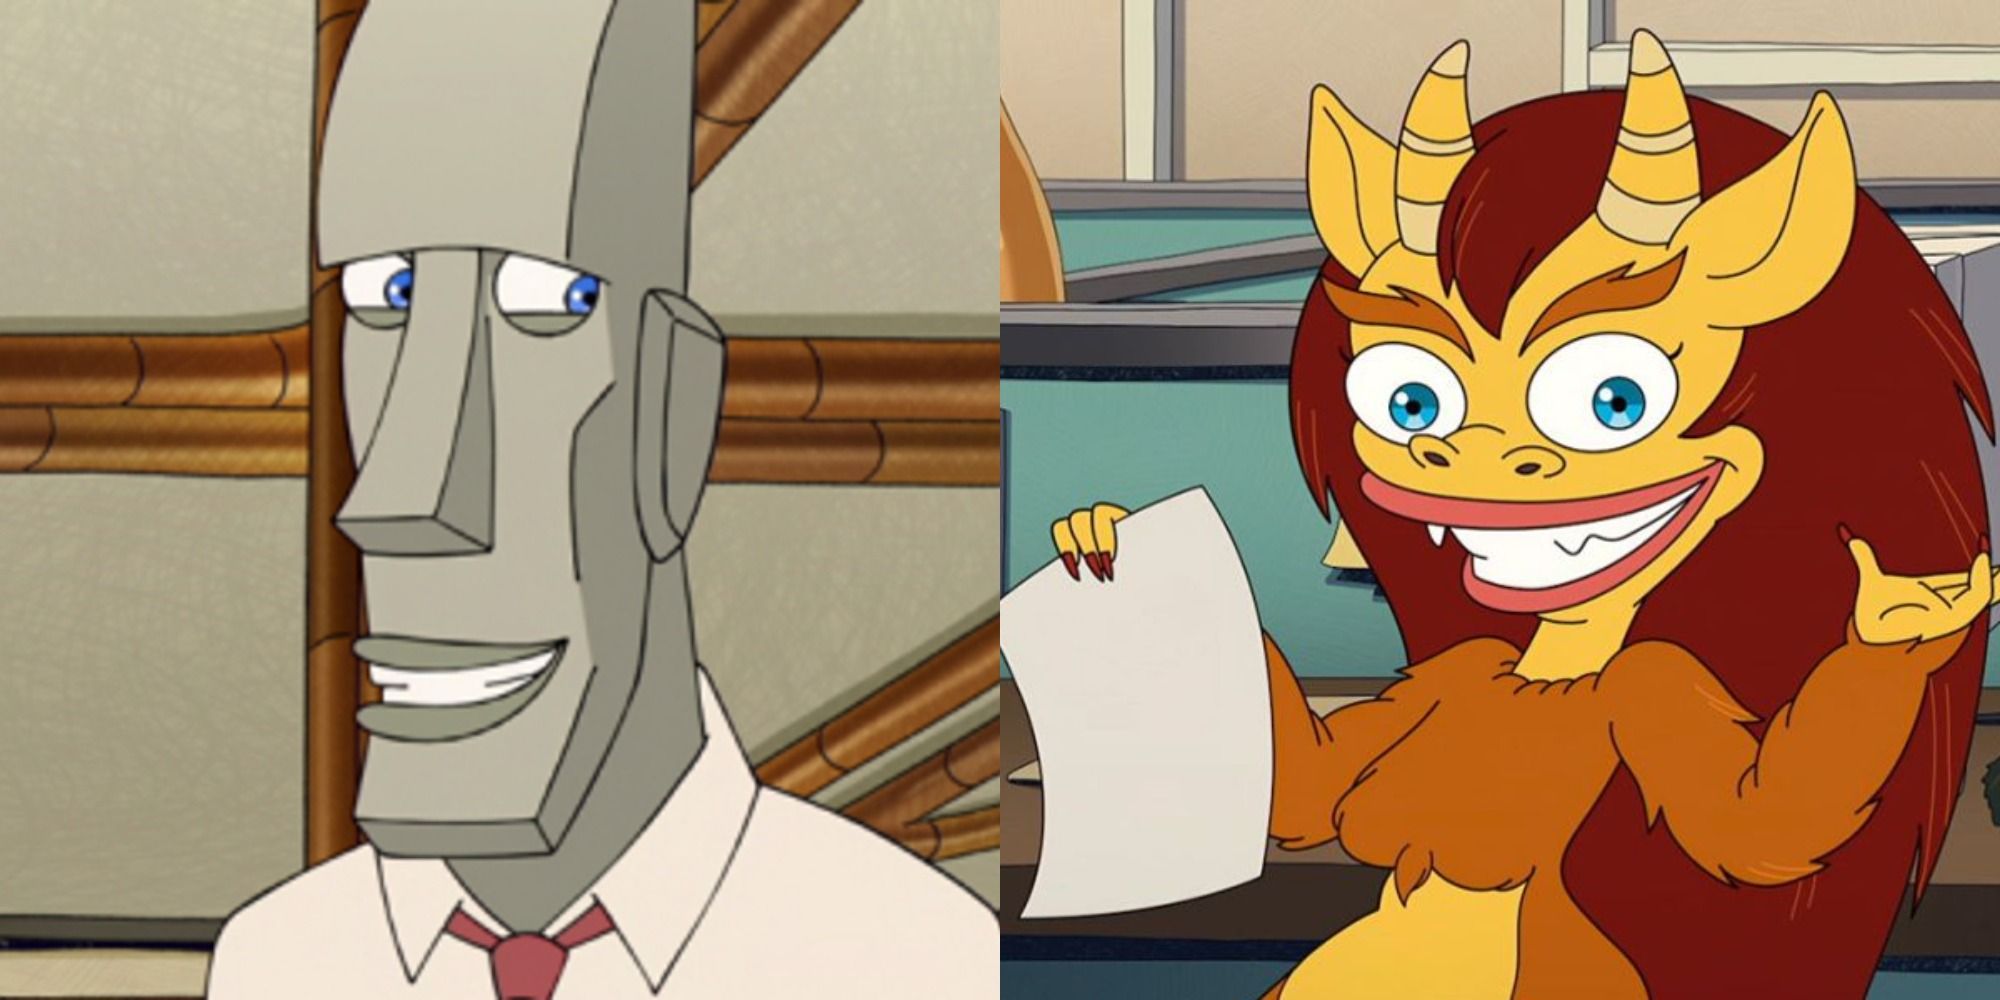 Split image of Pete the Logic Rock and Connie the Hormone Monster from Human Resources